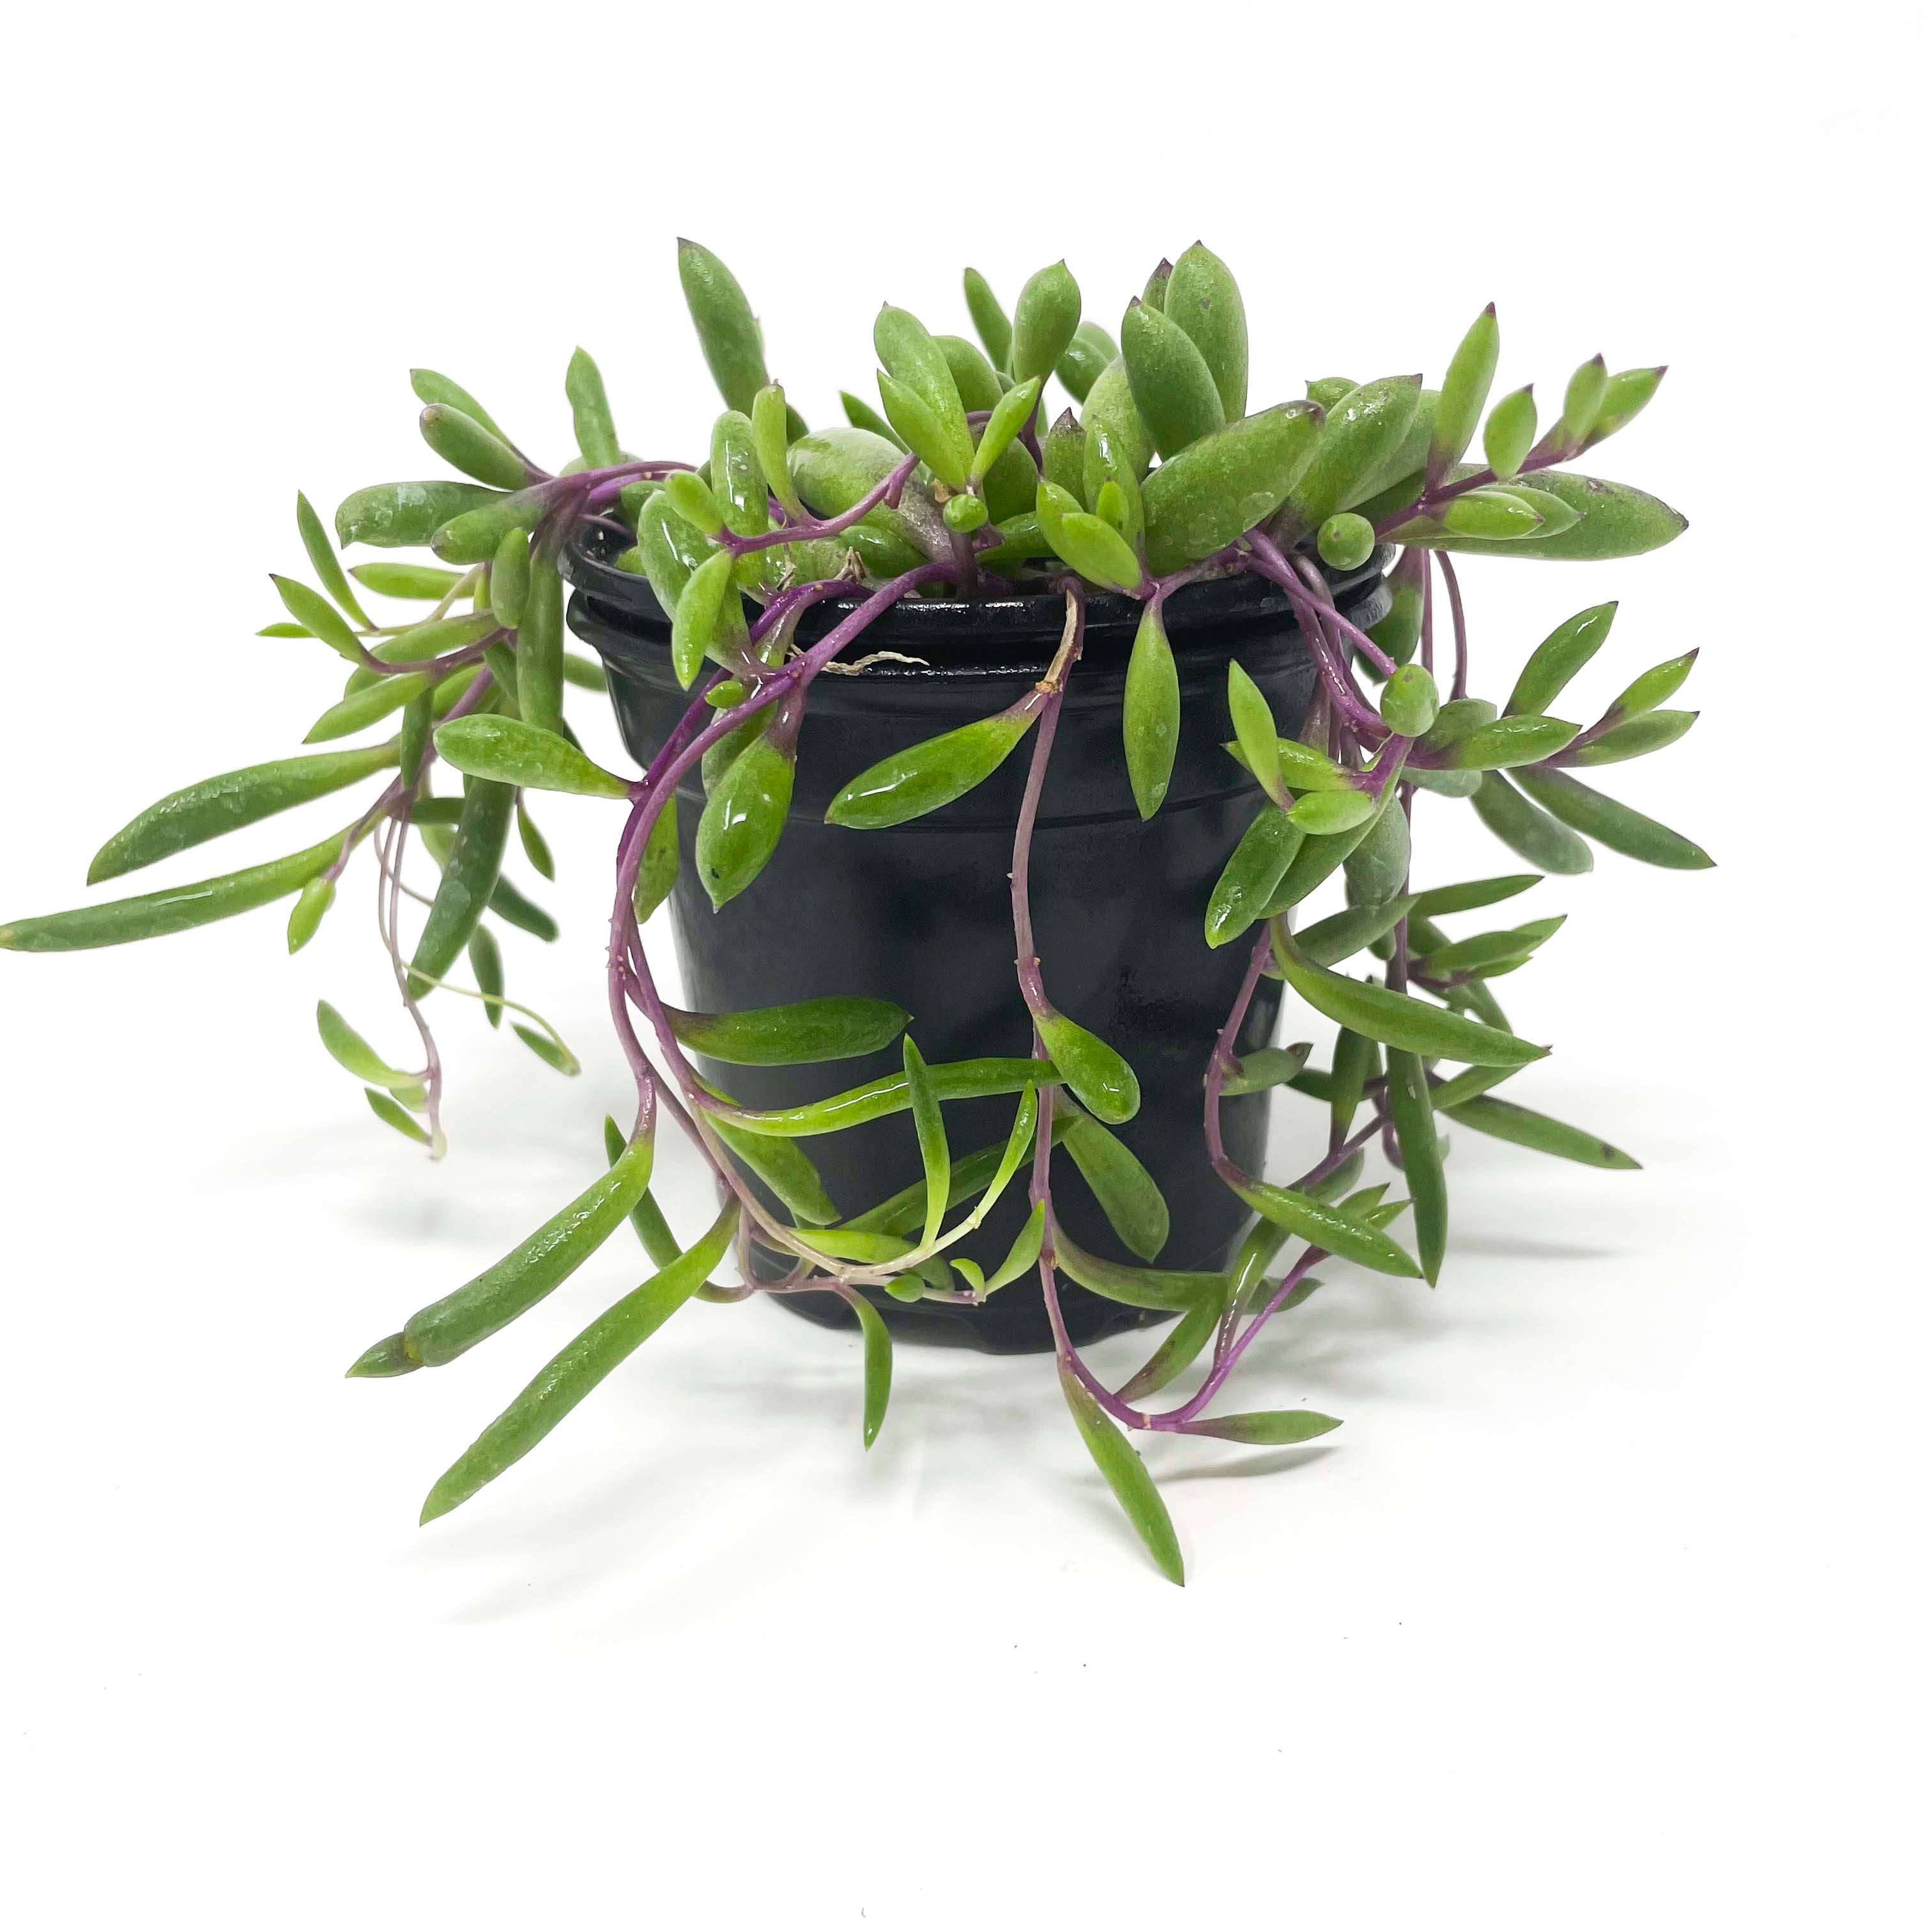 Cape Garden - String of rubies | Othonna Capensis (Senecio) Ruby Necklace @  from R98.95 (in hanging pot)  https://www.capegardenonline.co.za/collections/planted-hanging-baskets/products/string-of- rubies-hanging-basket-othonna-capensis-senecio-ruby ...